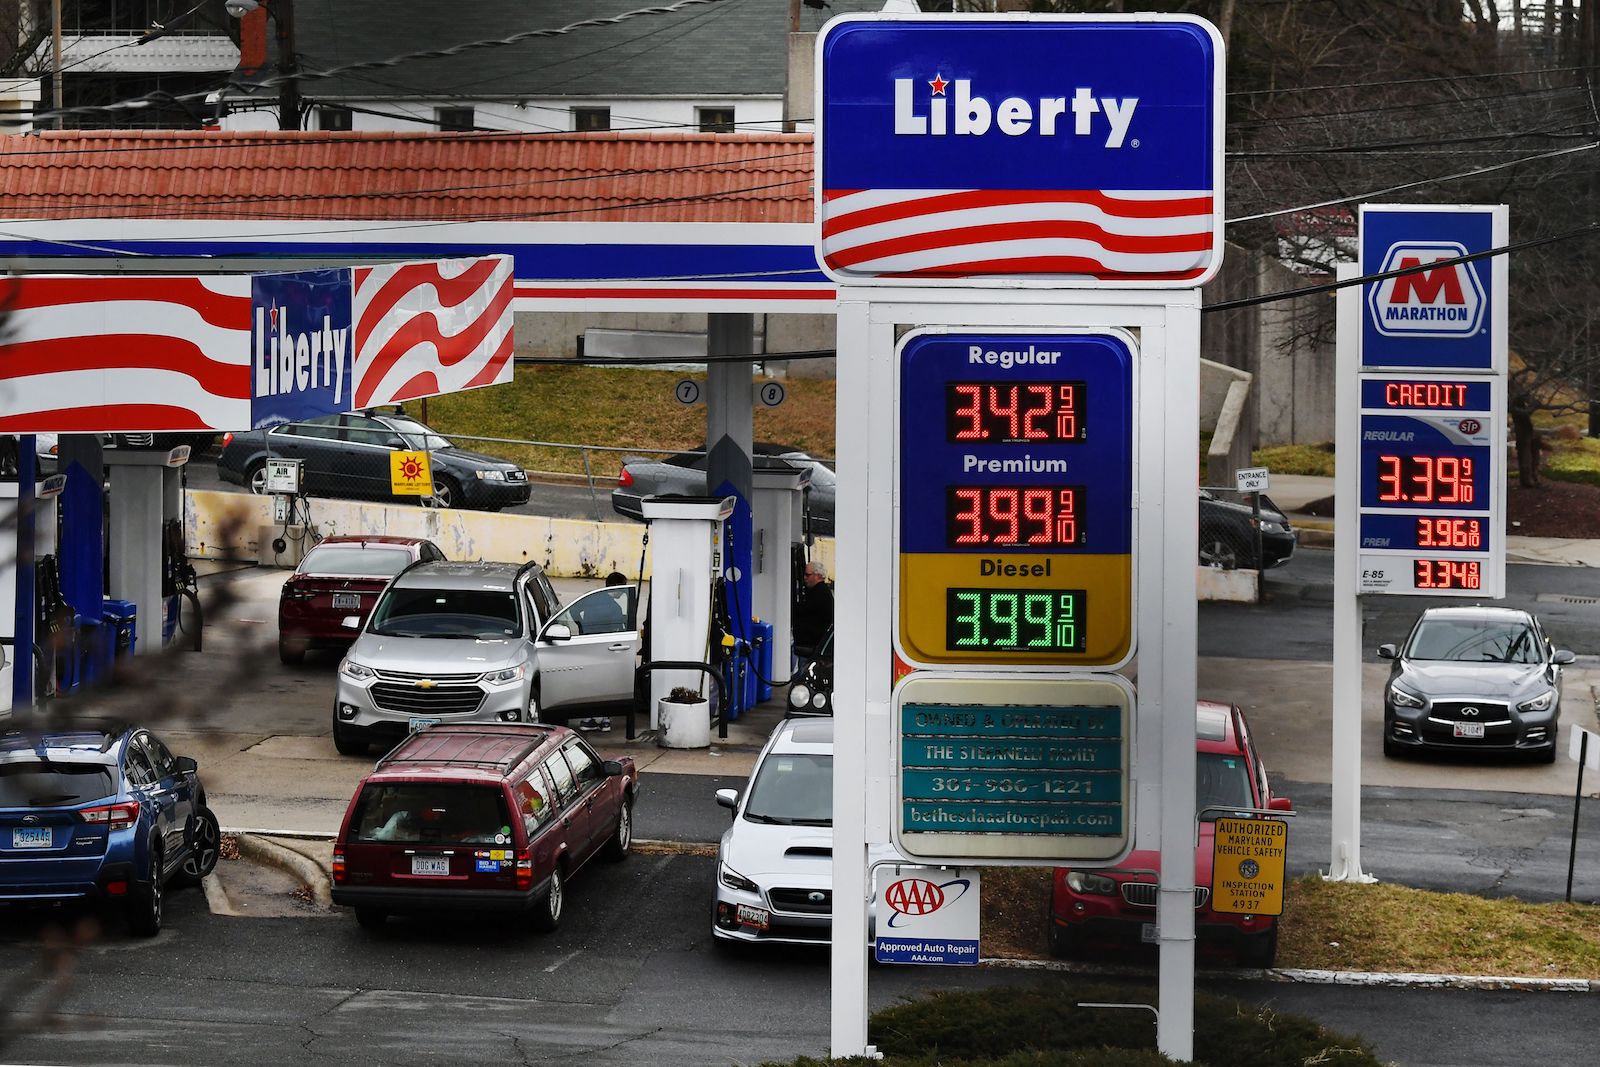 a gas station sign that says "liberty" with a flag motif shows prices while cars fuel up